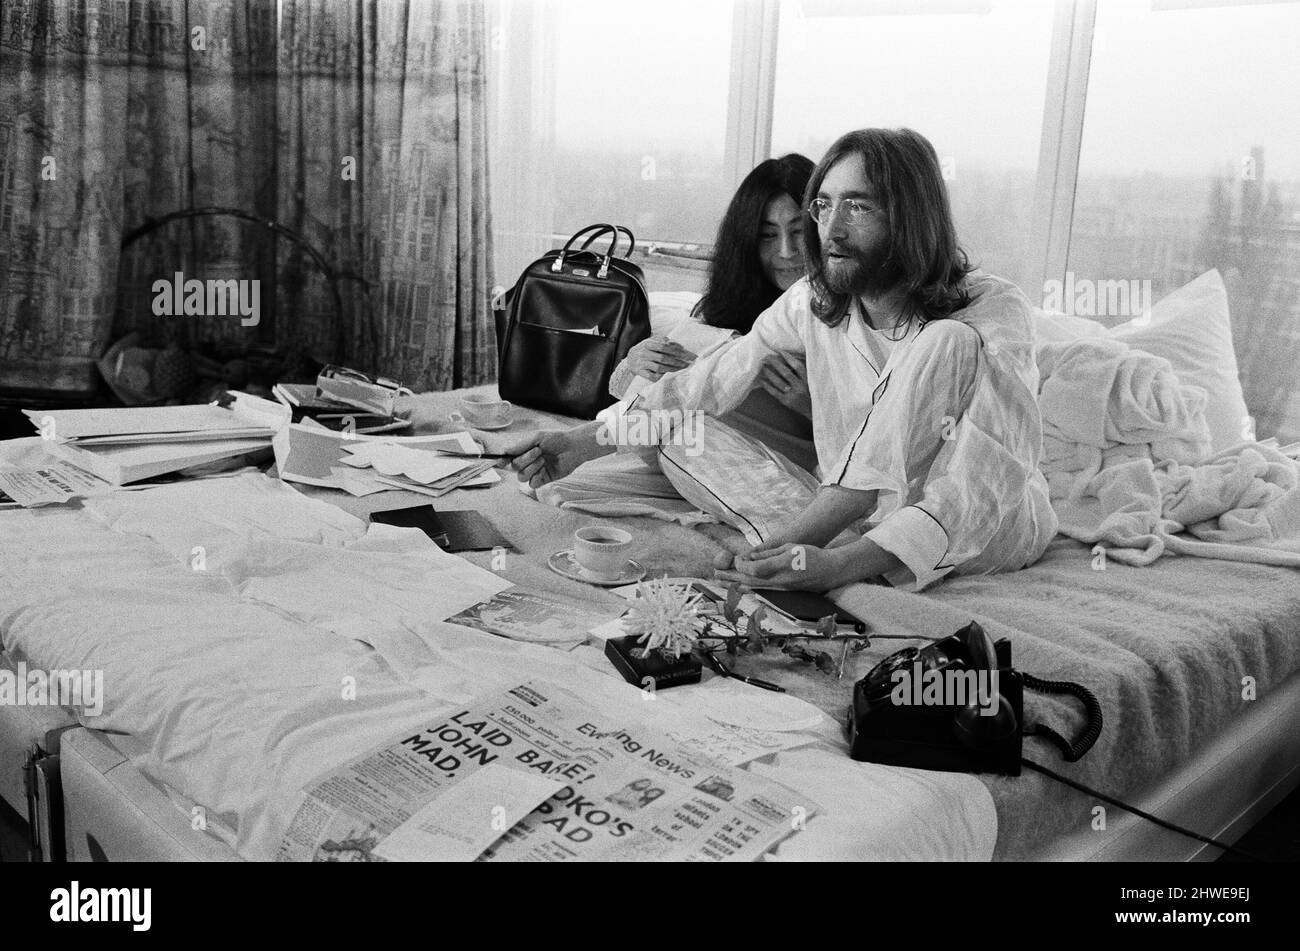 John Lennon and his wife Yoko Ono stage a 'bed in' on their 'honeymoon' in the Hilton Hotel in Amsterdam, as a protest against war and violence in the world. This was a seven day event, they are pictured on the last day. 30th March 1969. Stock Photo